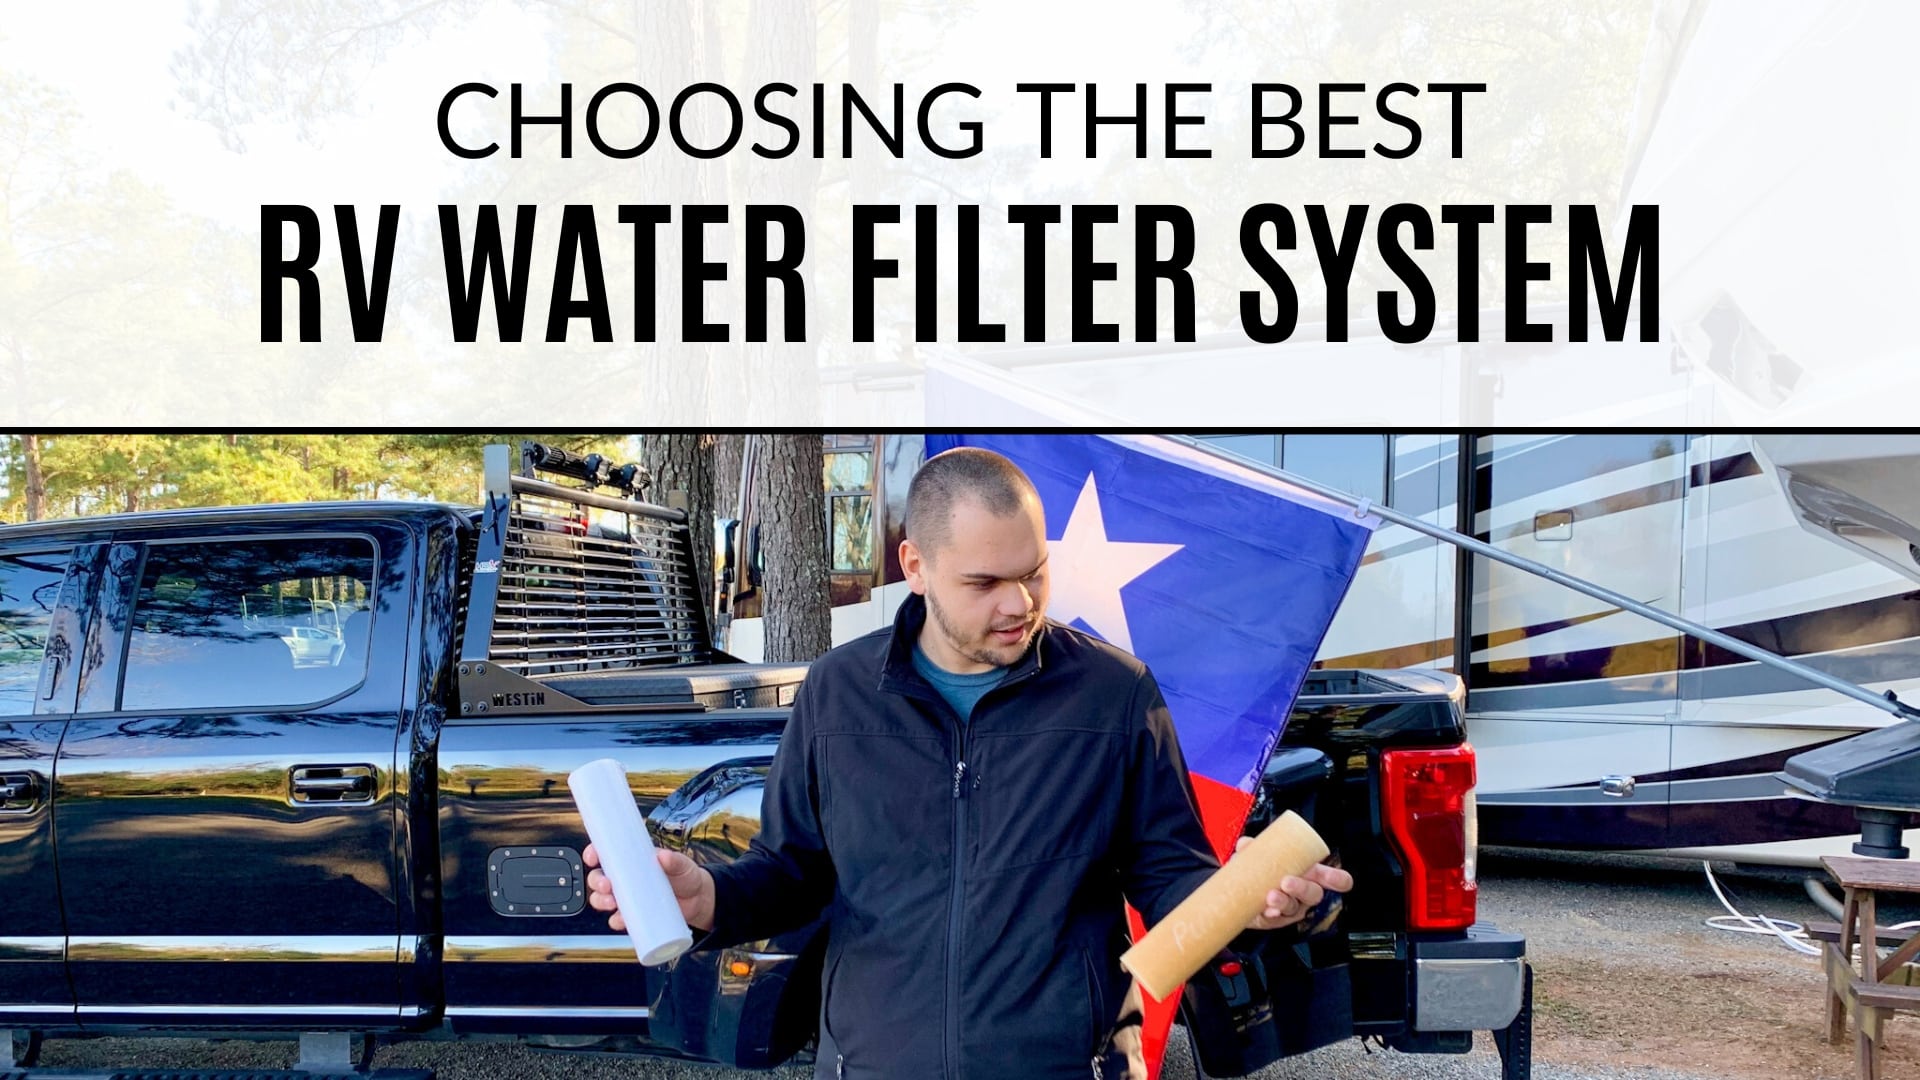 Philip wearing a black jacket holding two RV water filters. The filter on the left is brand new, white, and clean. The filter on the right is a used filter that's a dirty, light orange color. Behind Philip is a black pickup truck and a motorhome. The text at the top of the image says "Choosing the Best RV Water Filter System"